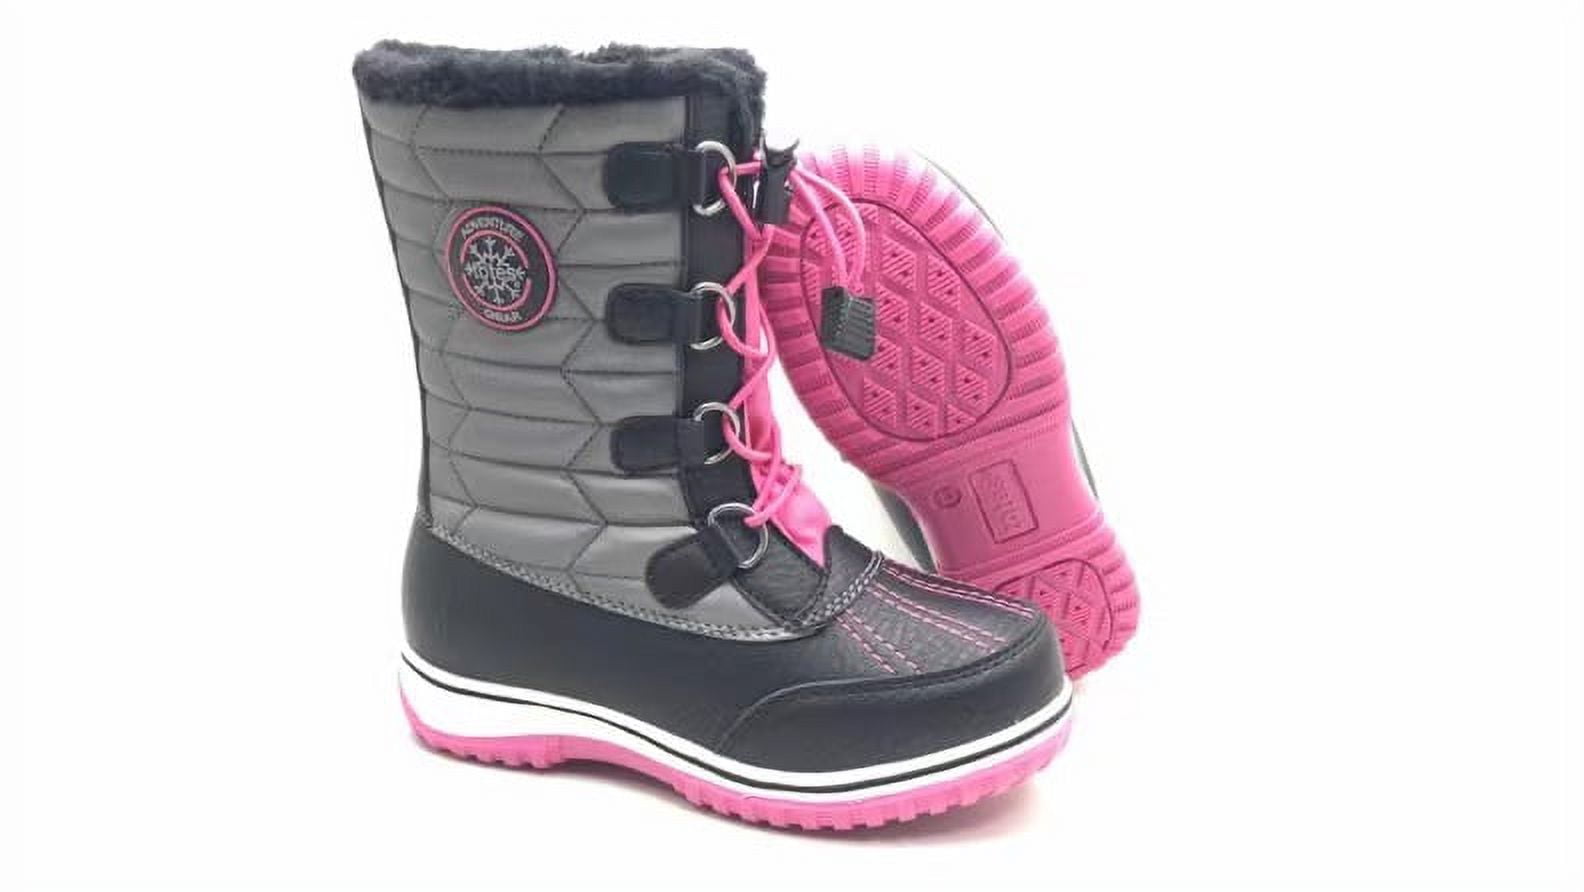 Totes Girls Snow Boot Kylie3, Sizes 11-6 - Walmart.com